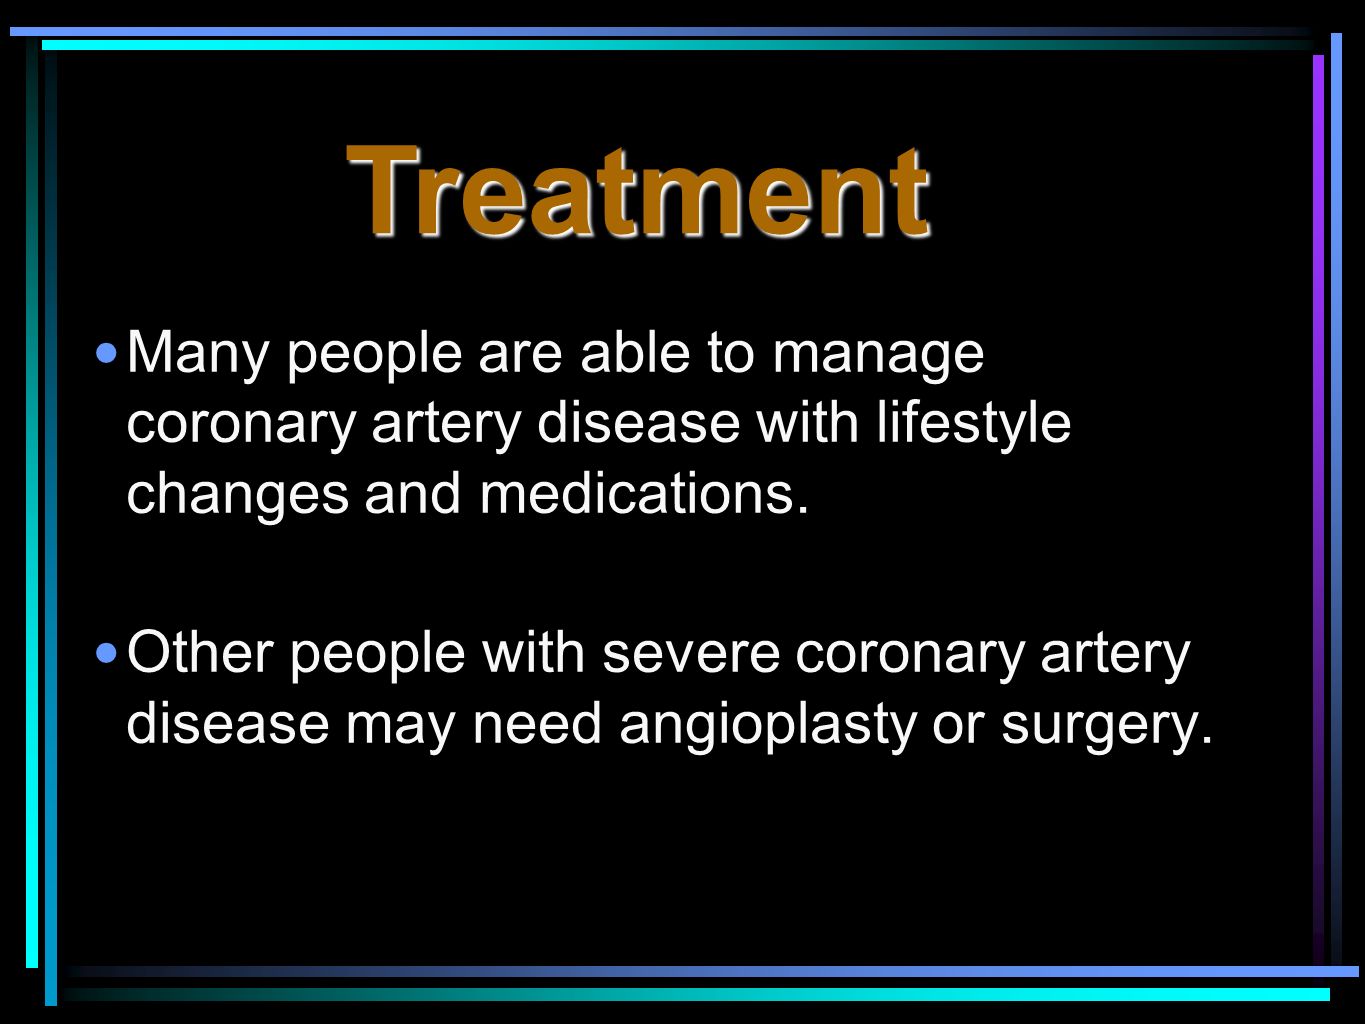 Many people are able to manage coronary artery disease with lifestyle changes and medications.